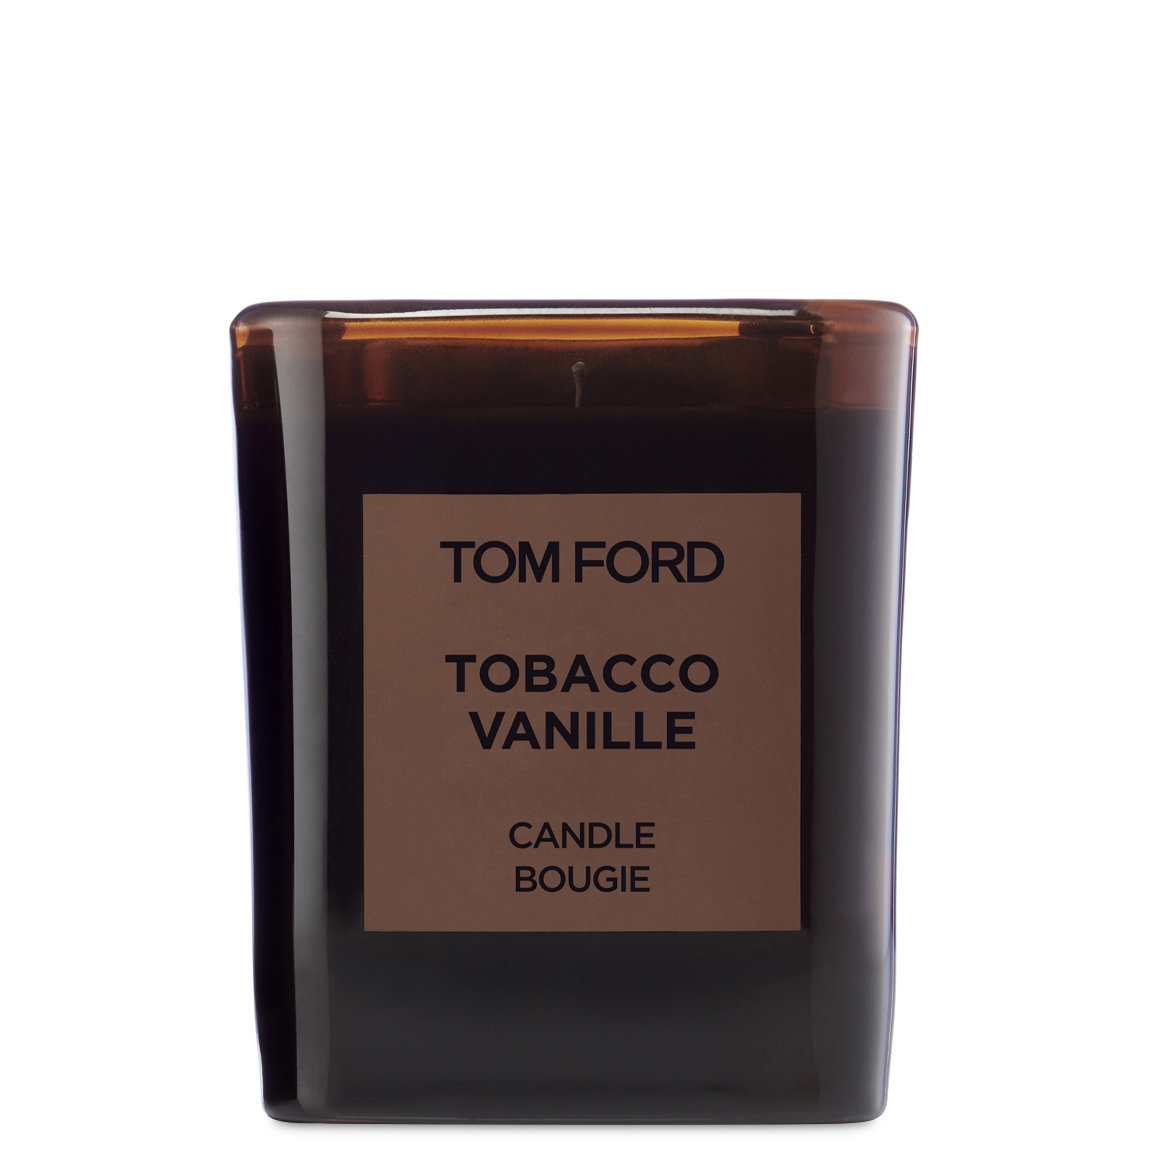 TOM FORD Tobacco Vanille Candle alternative view 1 - product swatch.